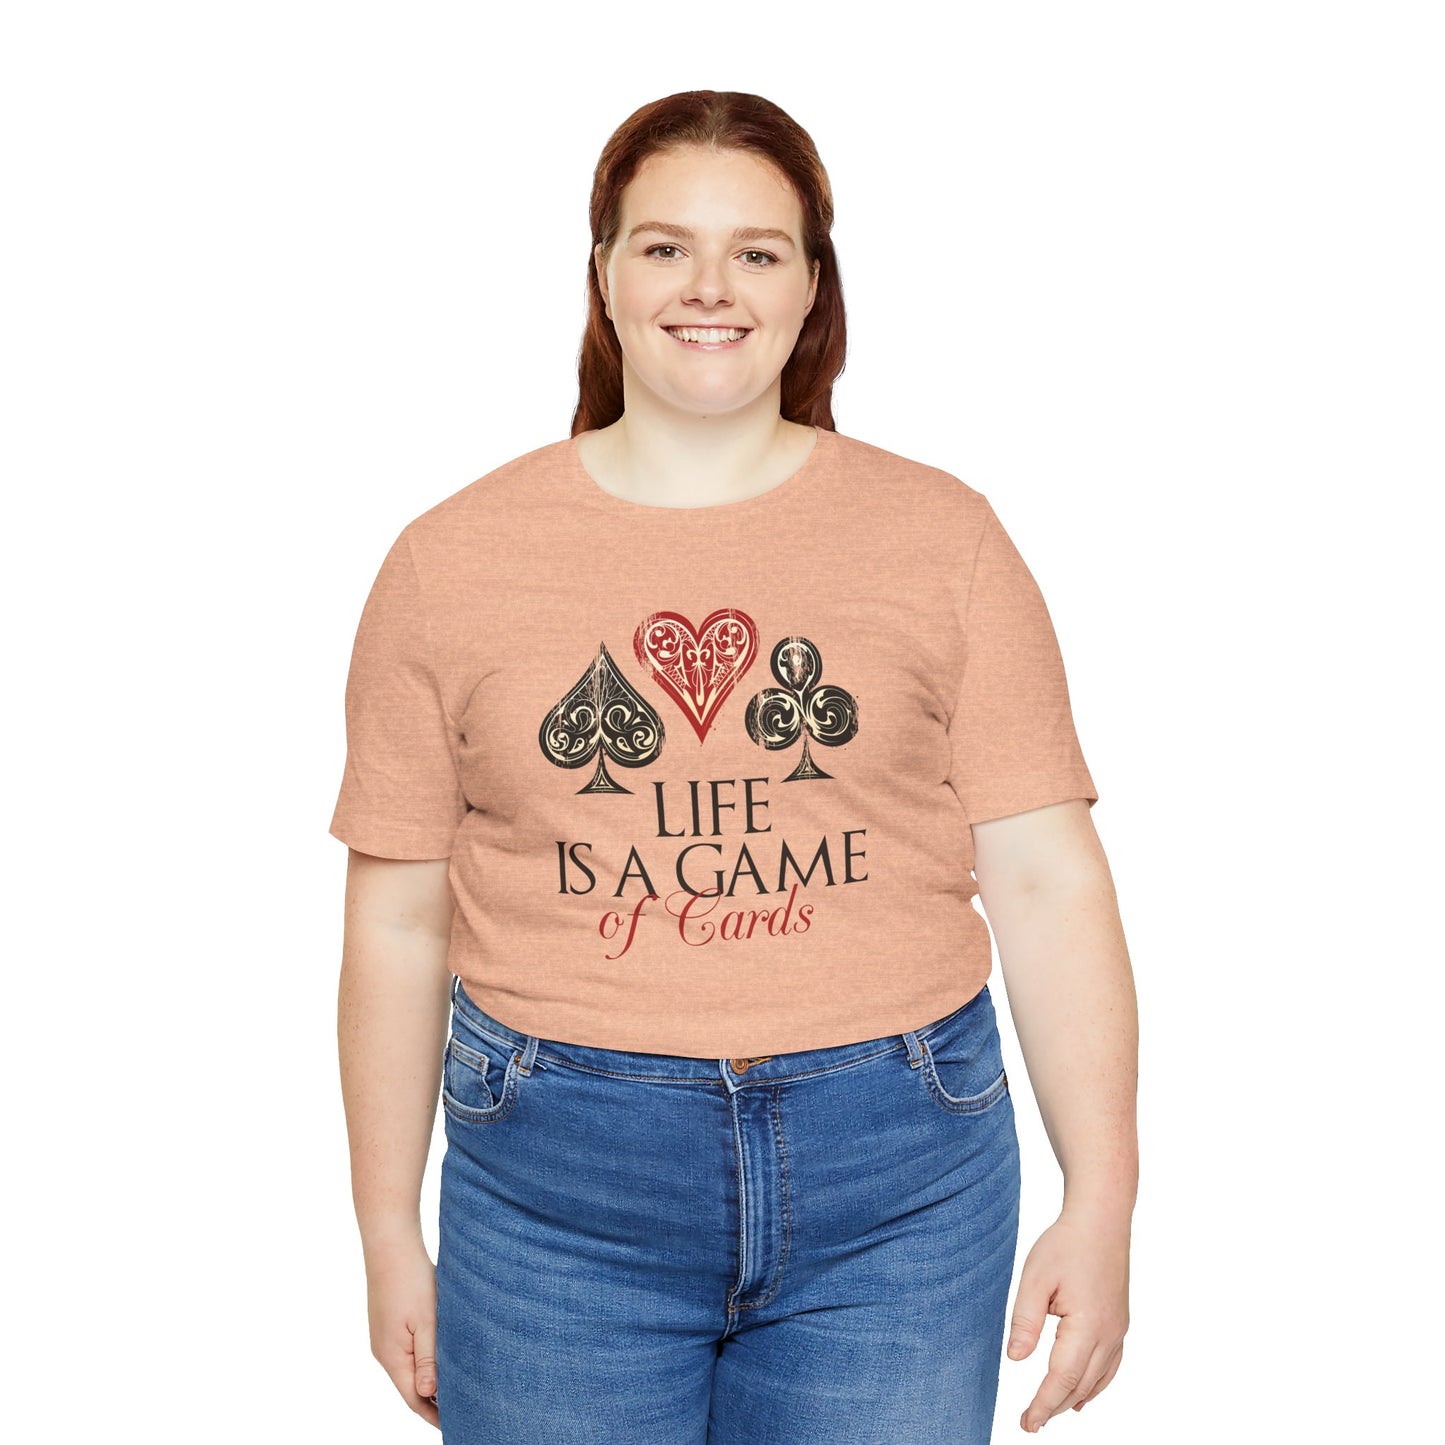 Life Is A Game of Cards Deep Quote Short Sleeve T-Shirt - Unisex - Motivational Treats